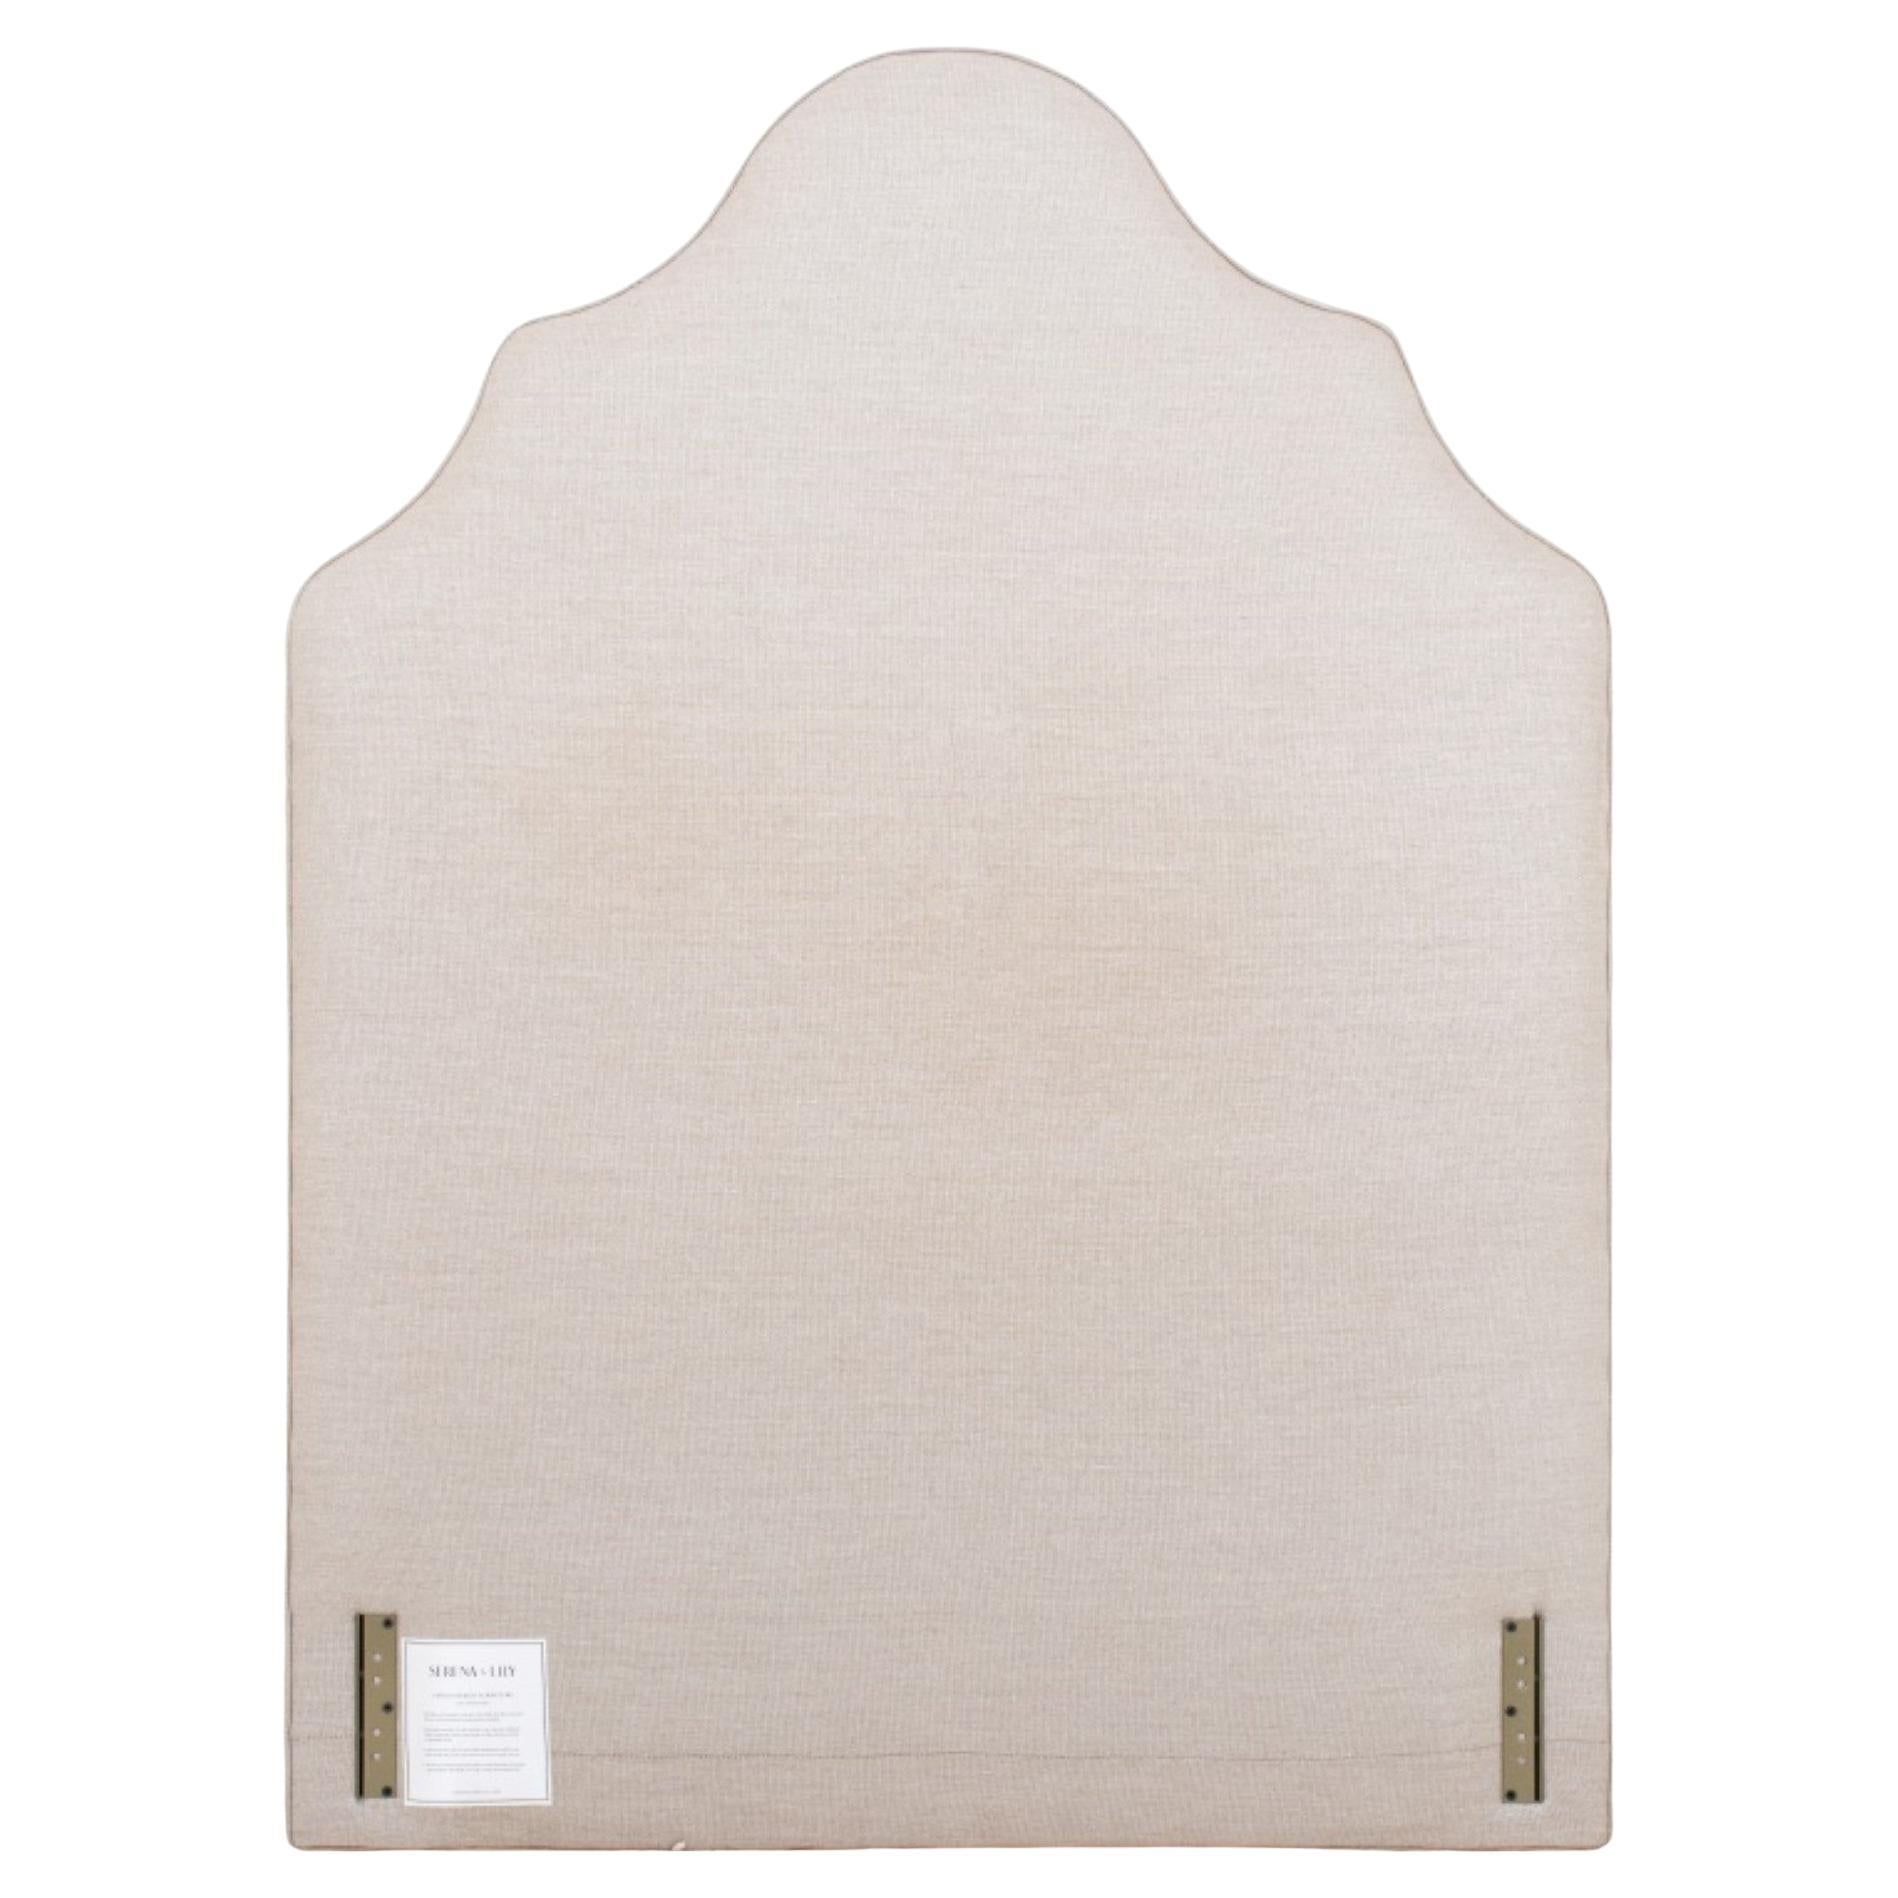 Serena & Lily Gray Upholstered Headboard and Frame